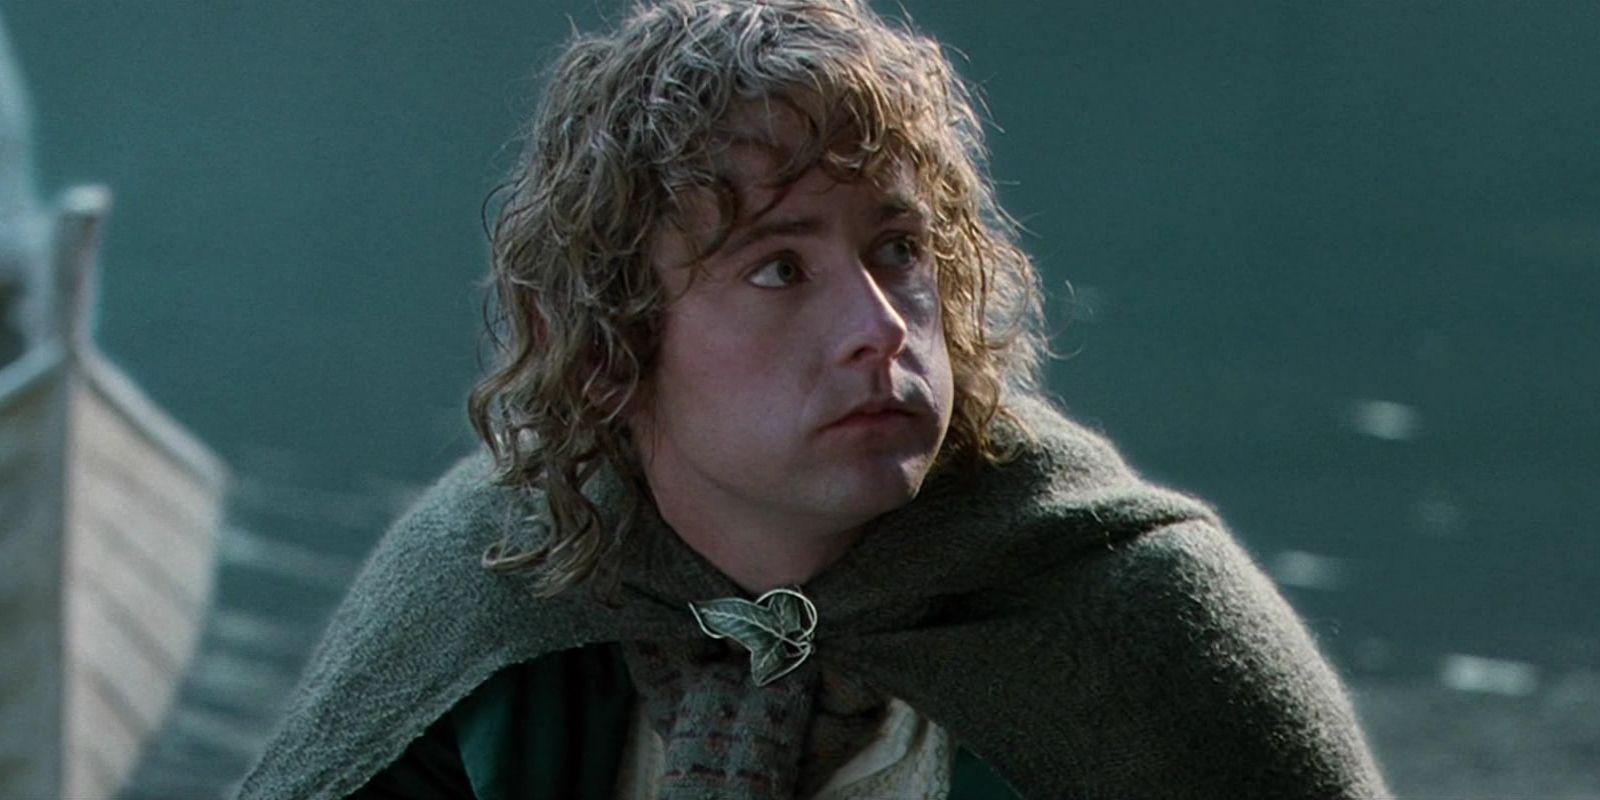 Pippin eating in the Fellowship Of The Ring